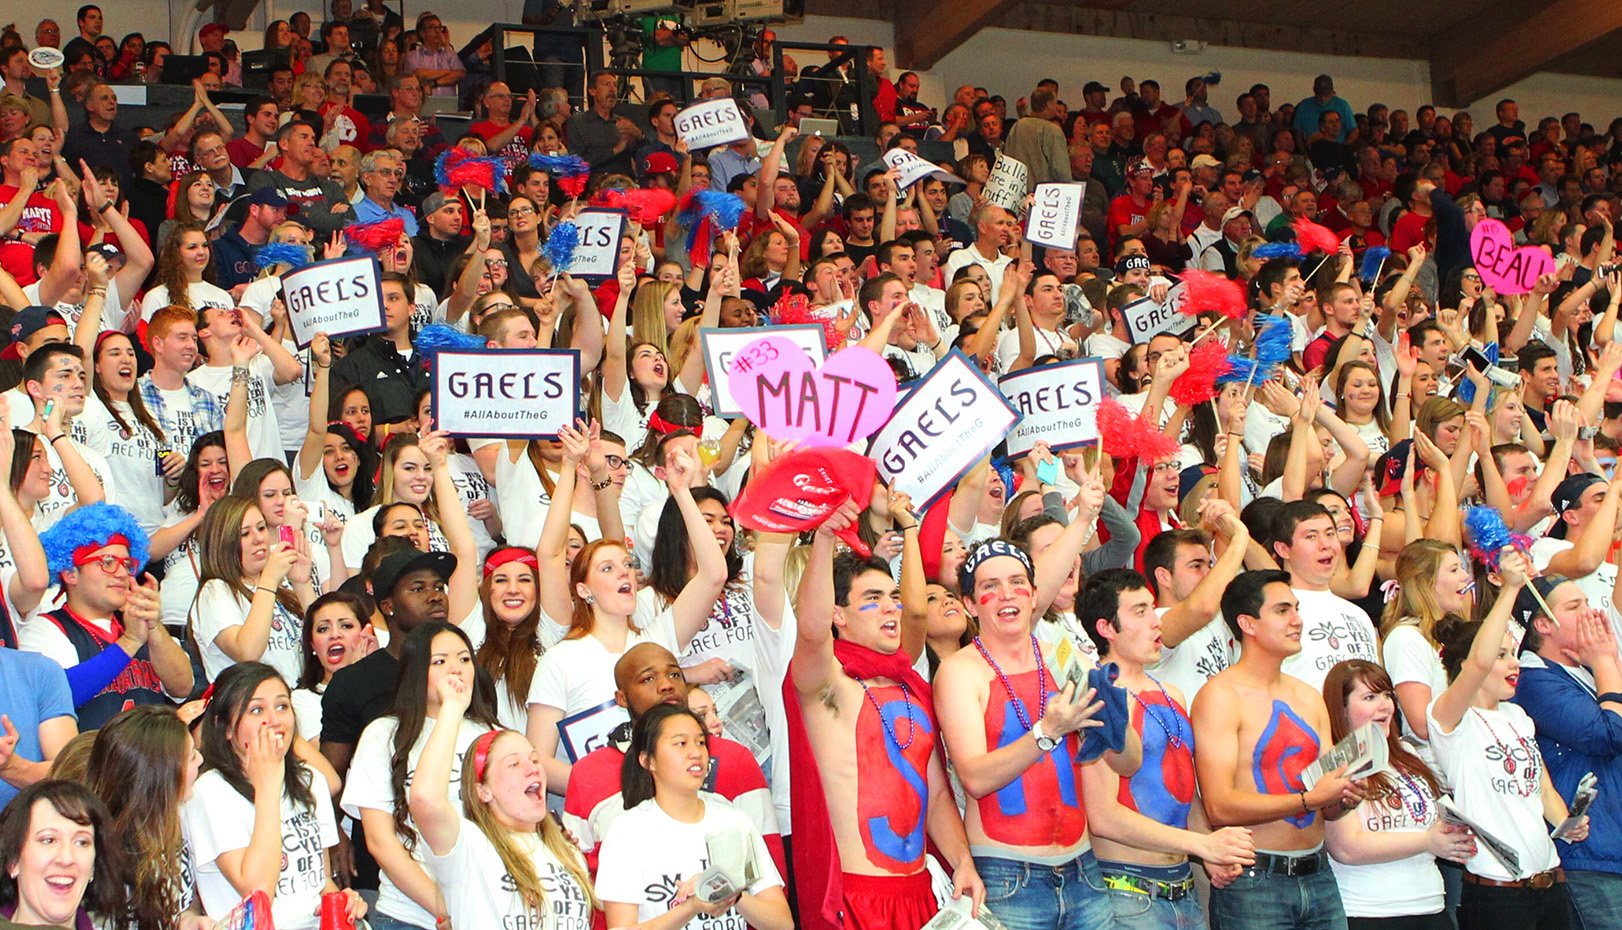 Students cheer at the Saint Mary's vs. Gonzaga basketball game in 2013